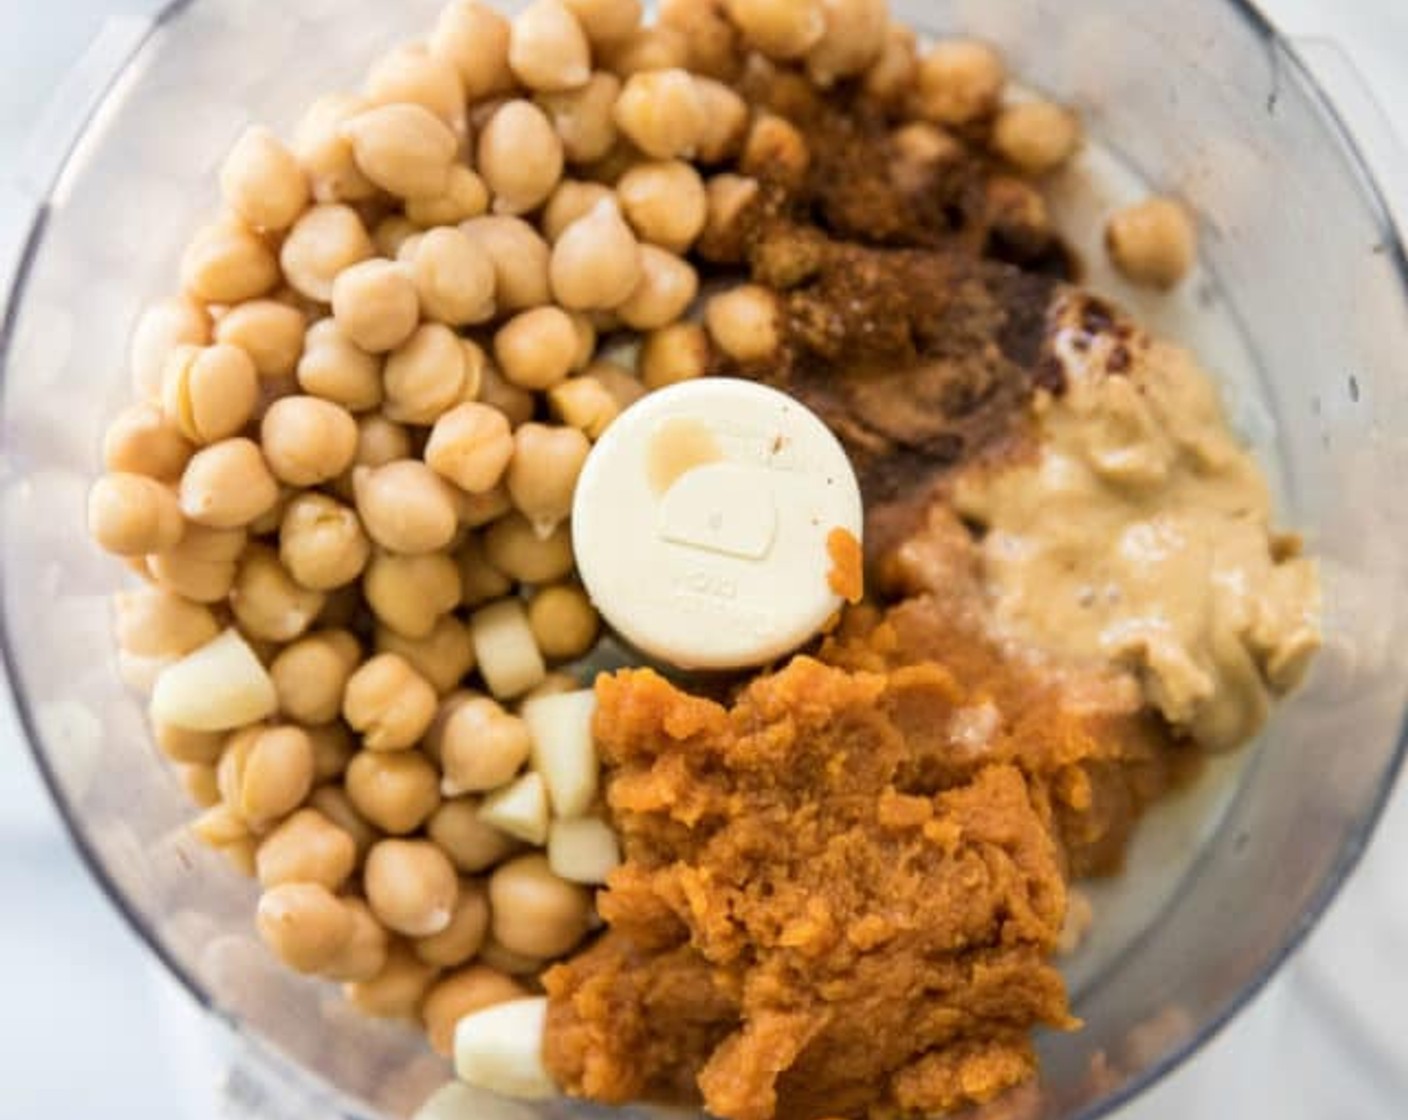 step 1 Combine Pumpkin Purée (1/2 cup), Chickpeas (1 can), {@10:}, Garlic (2 cloves), Tahini (2 Tbsp), Extra-Virgin Olive Oil (3 Tbsp), {@11:}, Sea Salt (1/2 tsp), Ground Cumin (1/2 tsp), Chili Powder (1/2 tsp), Ground Cinnamon (1/4 tsp), and Cayenne Pepper (1/8 tsp) in the bowl of a food processor or high-speed blender. Process or blend until smooth, stopping occasionally to scrape down sides of bowl or pitcher.